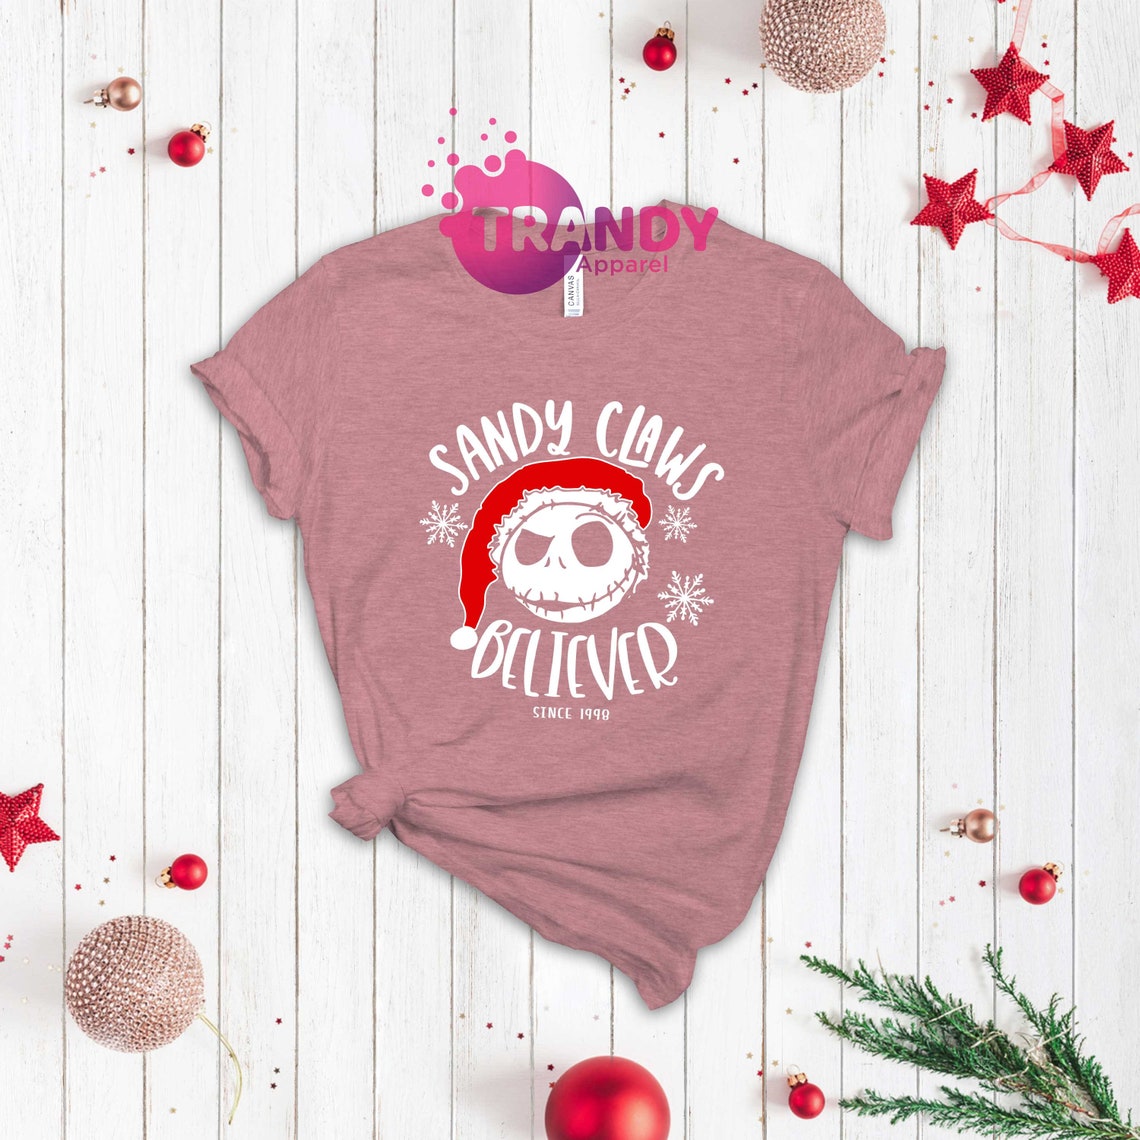 Sandy Claws Believer Shirt , Nightmare Before Christmas